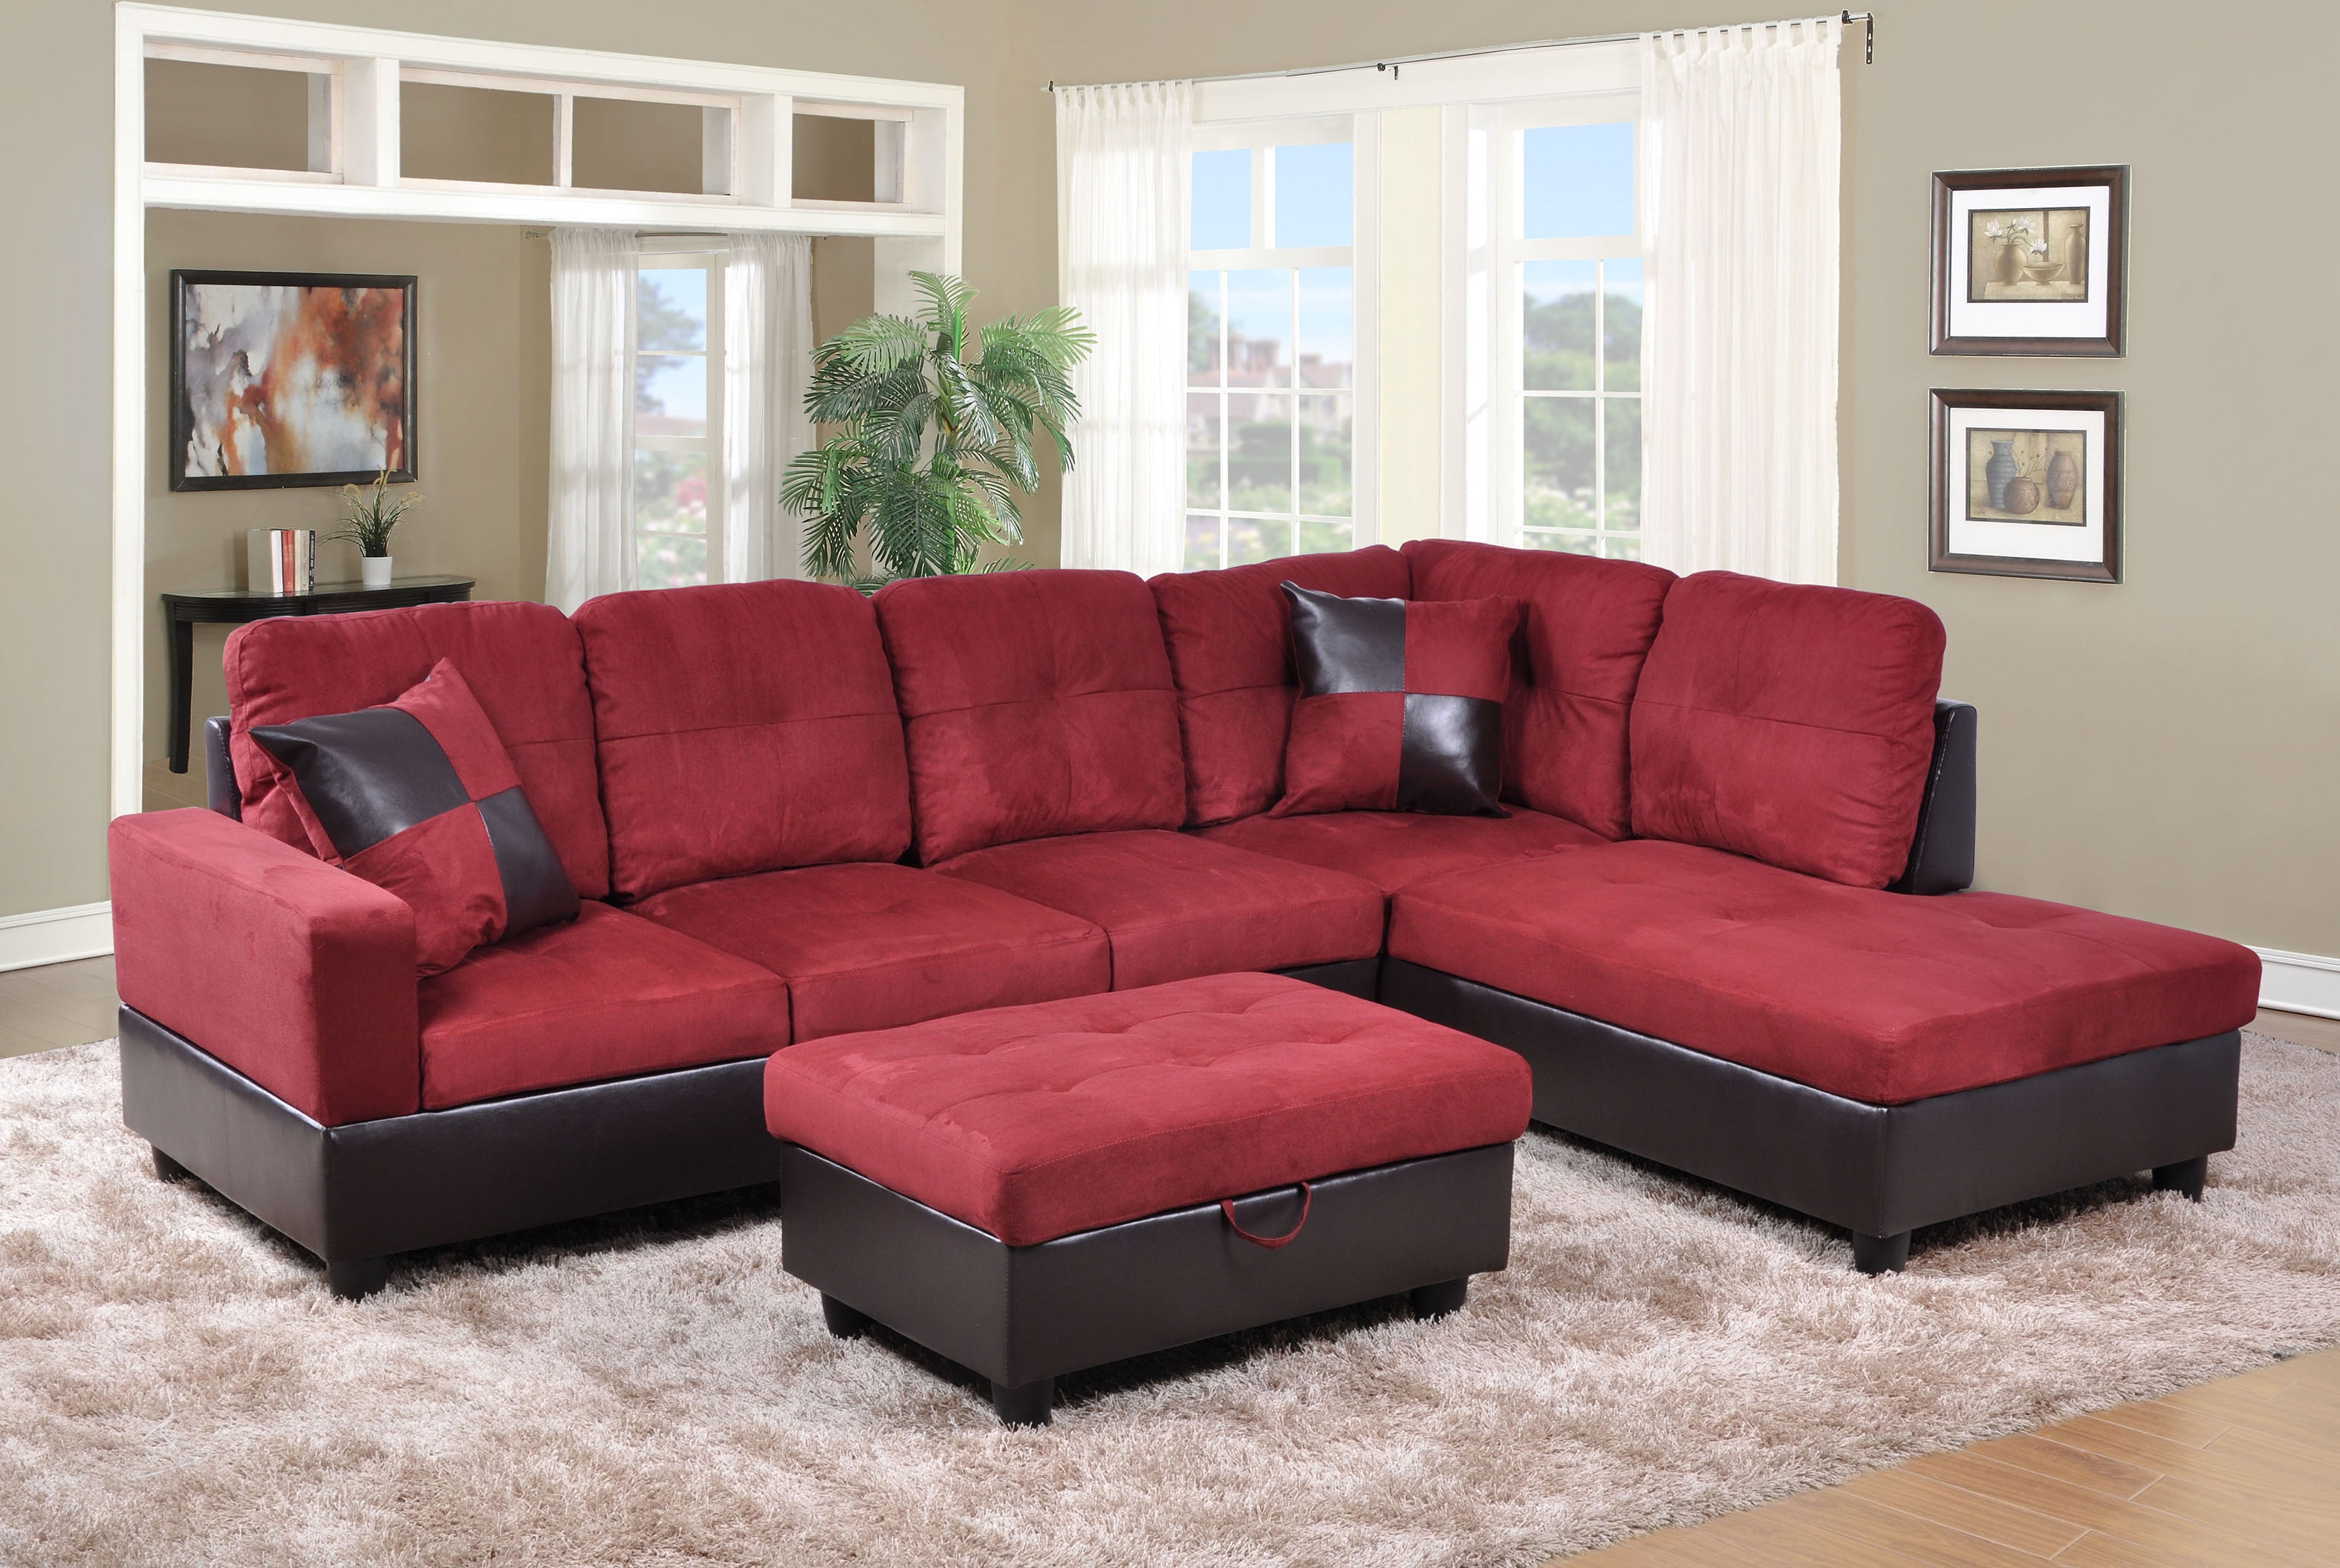 couches with storage compartments